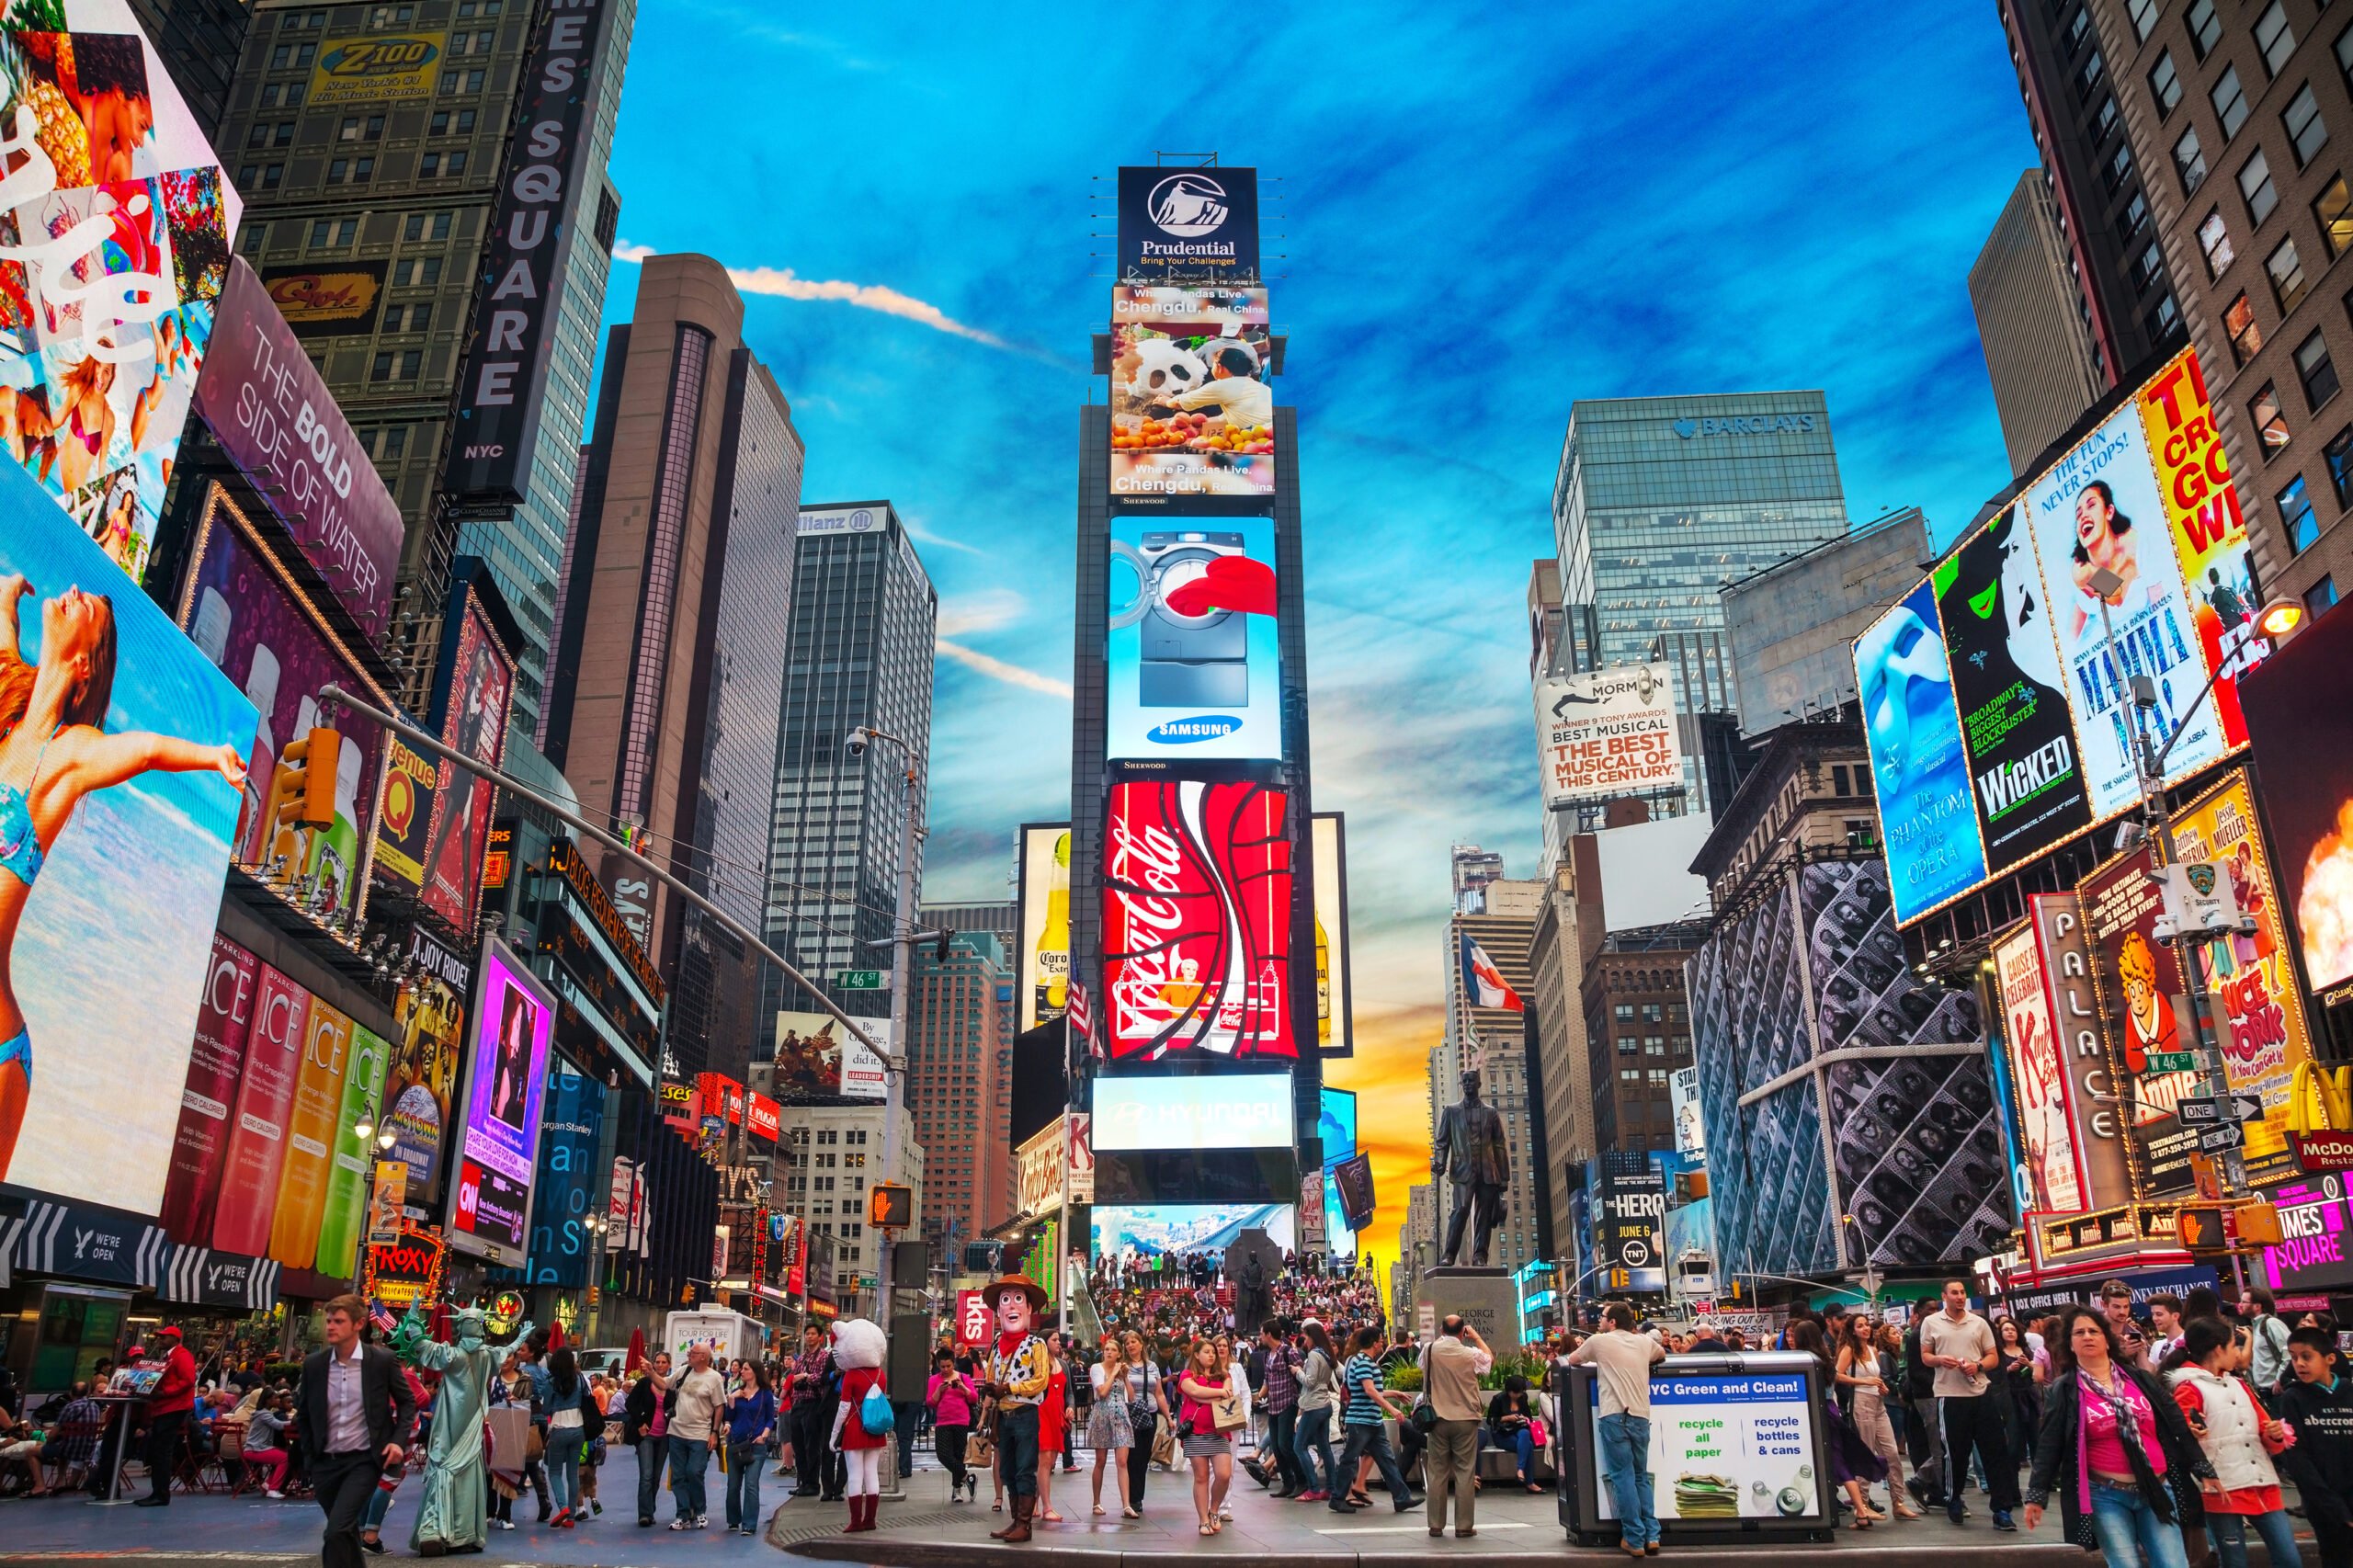 <ul> <li><strong>Location:</strong> New York, New York</li> </ul> <p>We don't mean to pick on New York City. However, as the nation's largest city, it stands to reason that it is also home to some of the country's biggest tourist traps.</p> <p>Times Square is the renowned location of the New Year's Eve ball drop. It is famous for its bright lights and digital billboards. Times Square has been featured in countless movies and TV shows.</p> <p>Because of Times Square's iconic reputation, it is a magnet for tourists. As such, it is also filled with overpriced restaurants and stores. Visiting Times Square itself is free, but good luck getting out of there without spending too much money on, well, everything.</p> <p>Many NYC residents view Times Square as the biggest tourist trap in the city. In fact, a lot of locals avoid it at all costs. It is one of the busiest pedestrian areas in the world, with an estimated 50 million visitors annually.</p> <p>Agree with this? Hit the Thumbs Up button above. Disagree? Let us know in the comments with what you'd change.</p>